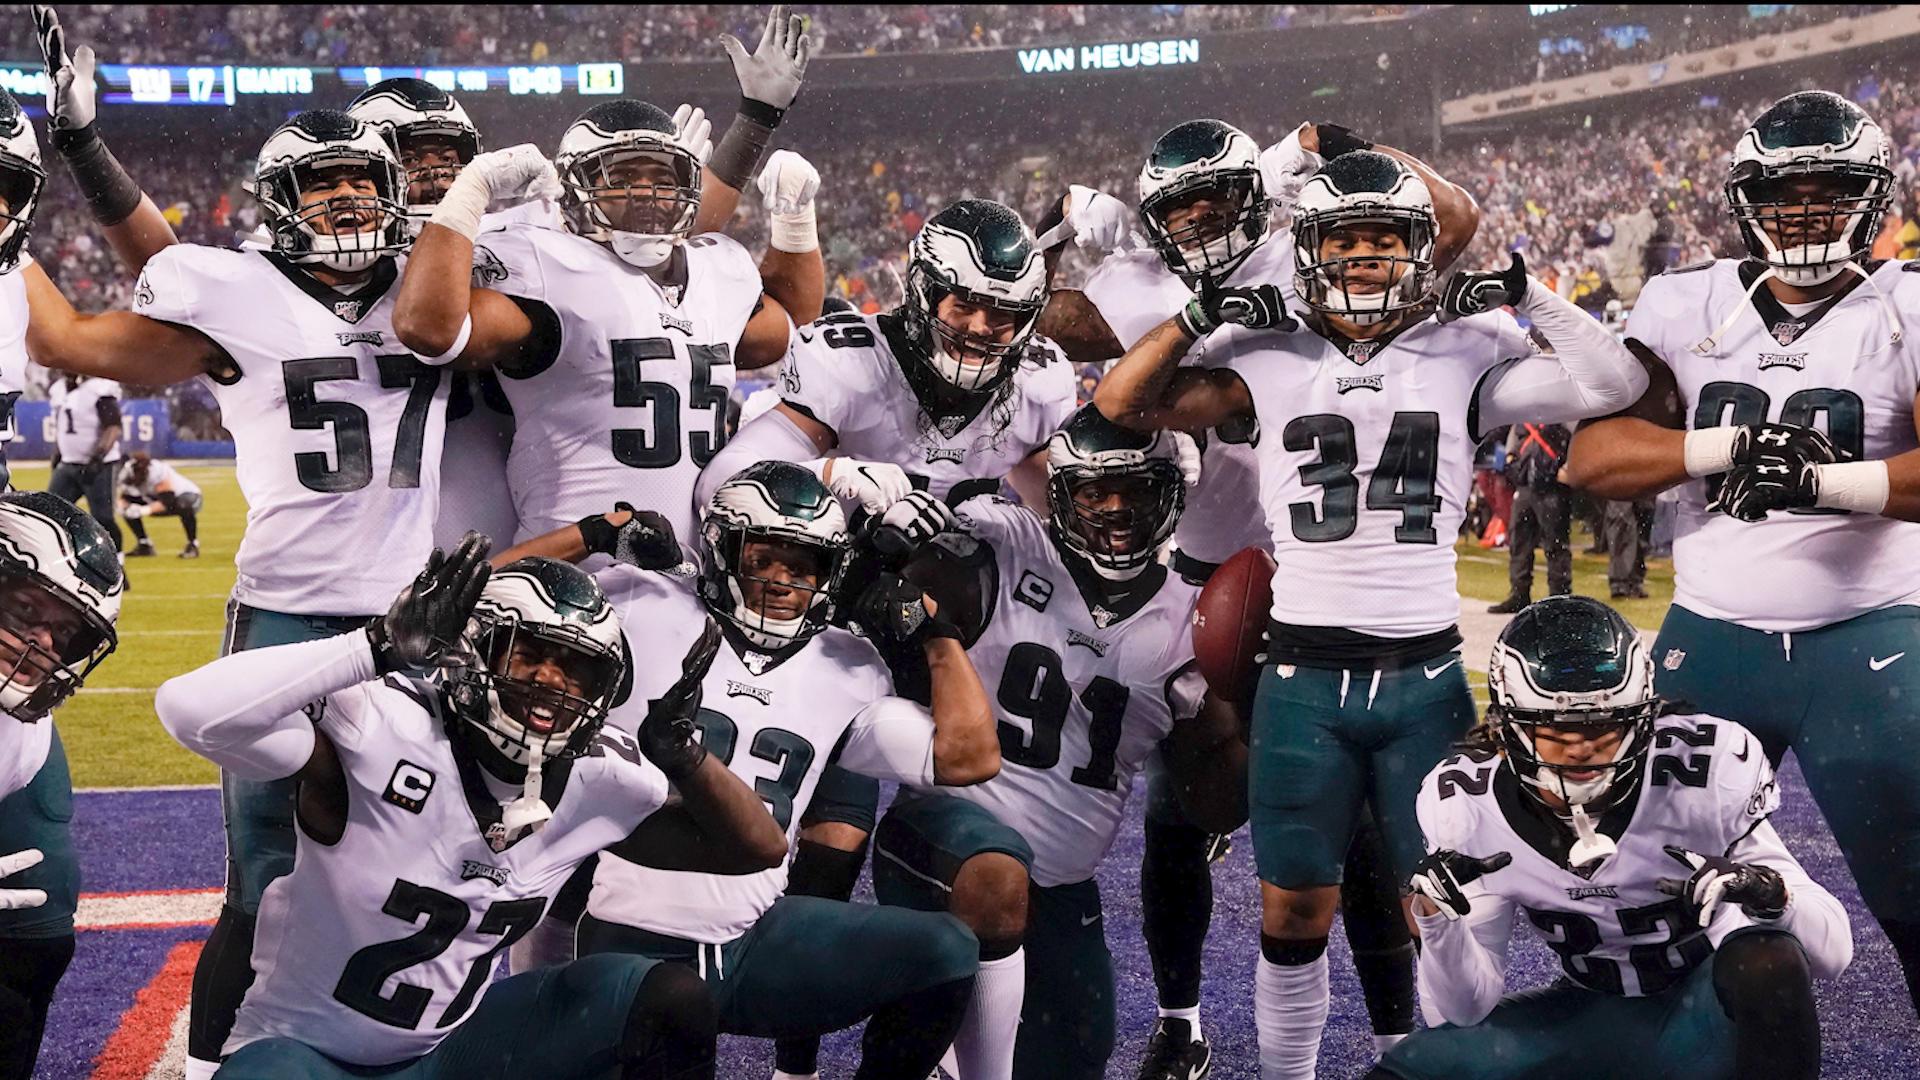 Injury-ravaged Eagles beat Giants 34-17 to win NFC East